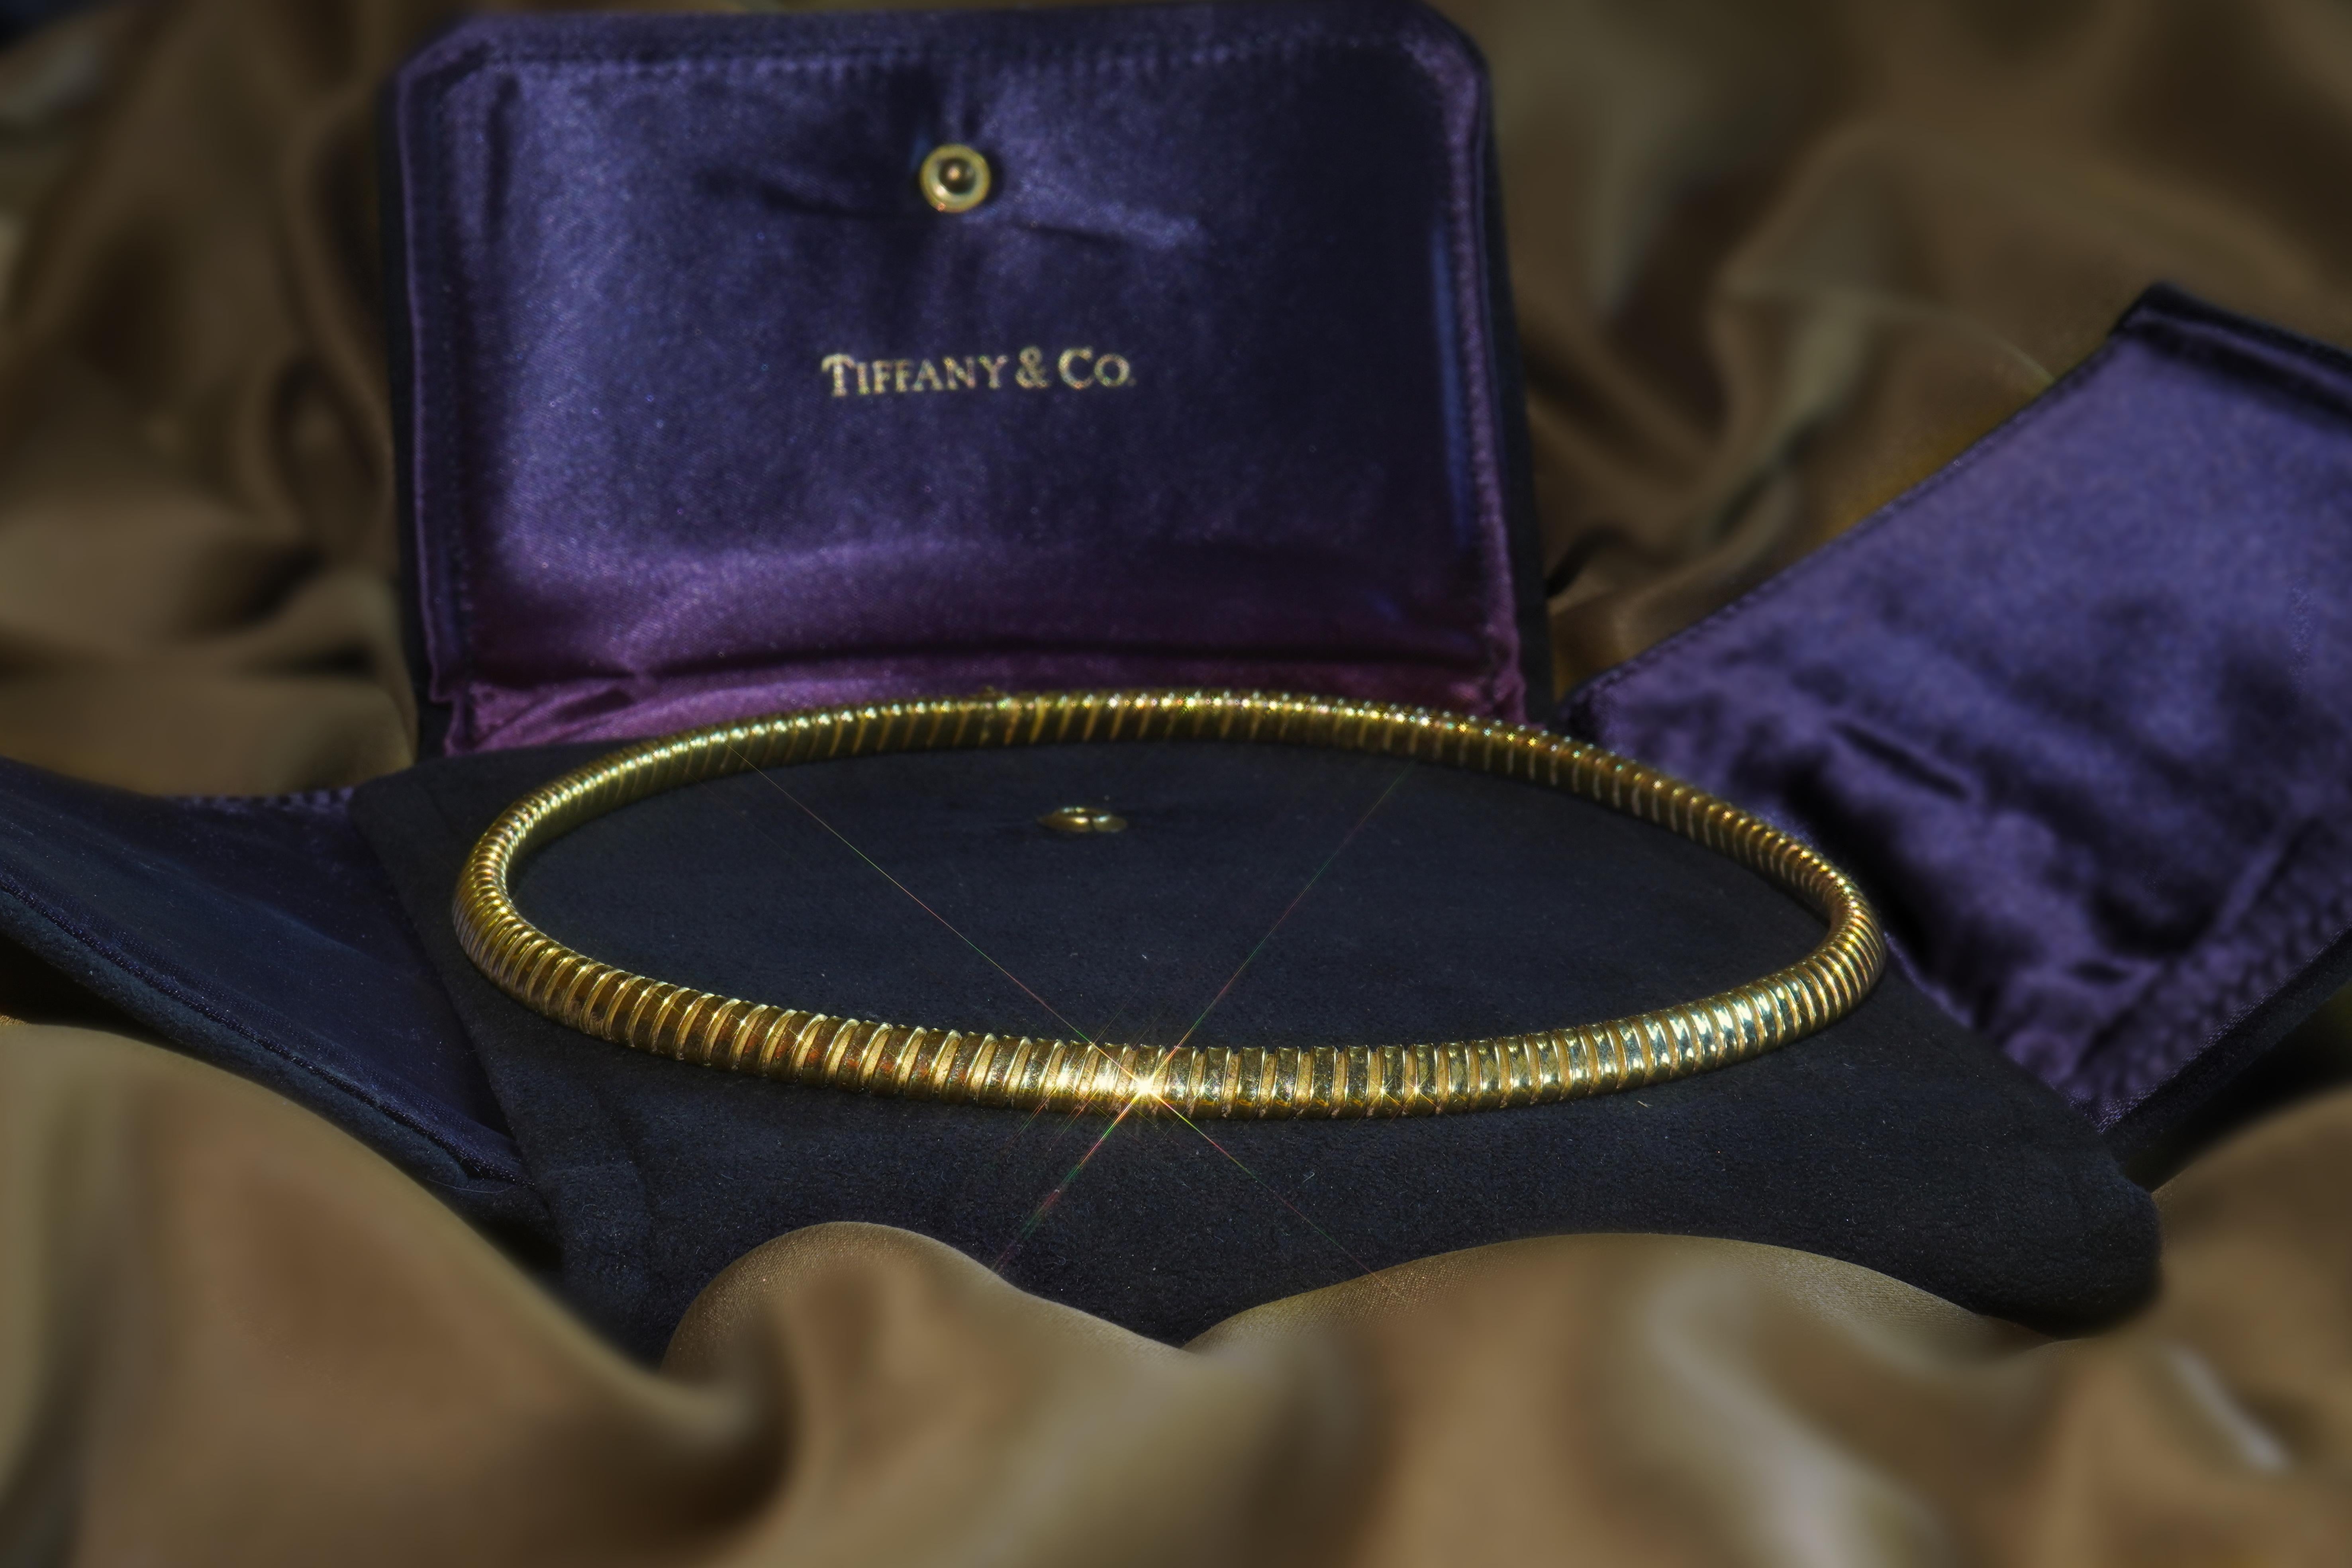 Tiffany & Co 18K Necklace Vintage Solid Gold Choker Omega Chain Fine Authentic In Good Condition For Sale In Sylvania, GA